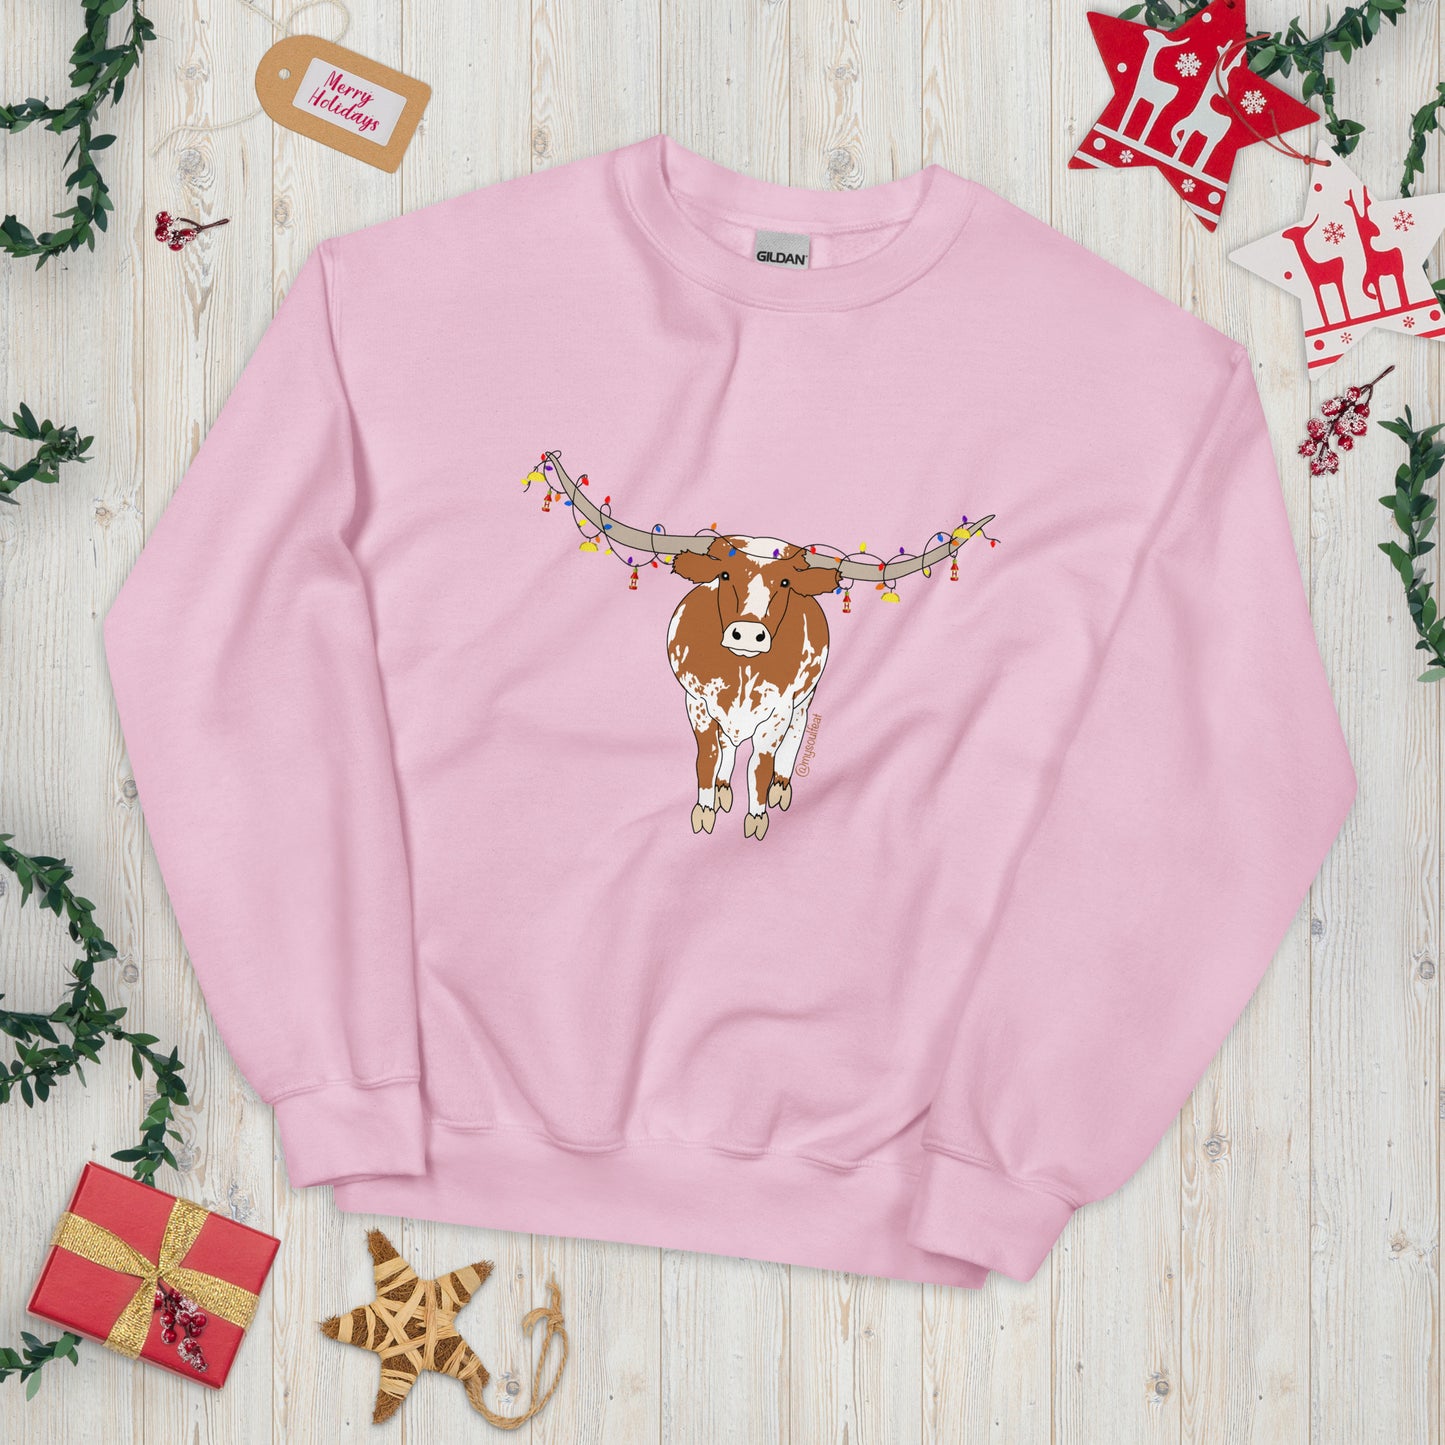 Hooked on Holiday Lights - Longhorn and Ornaments (Unisex Sweatshirt)